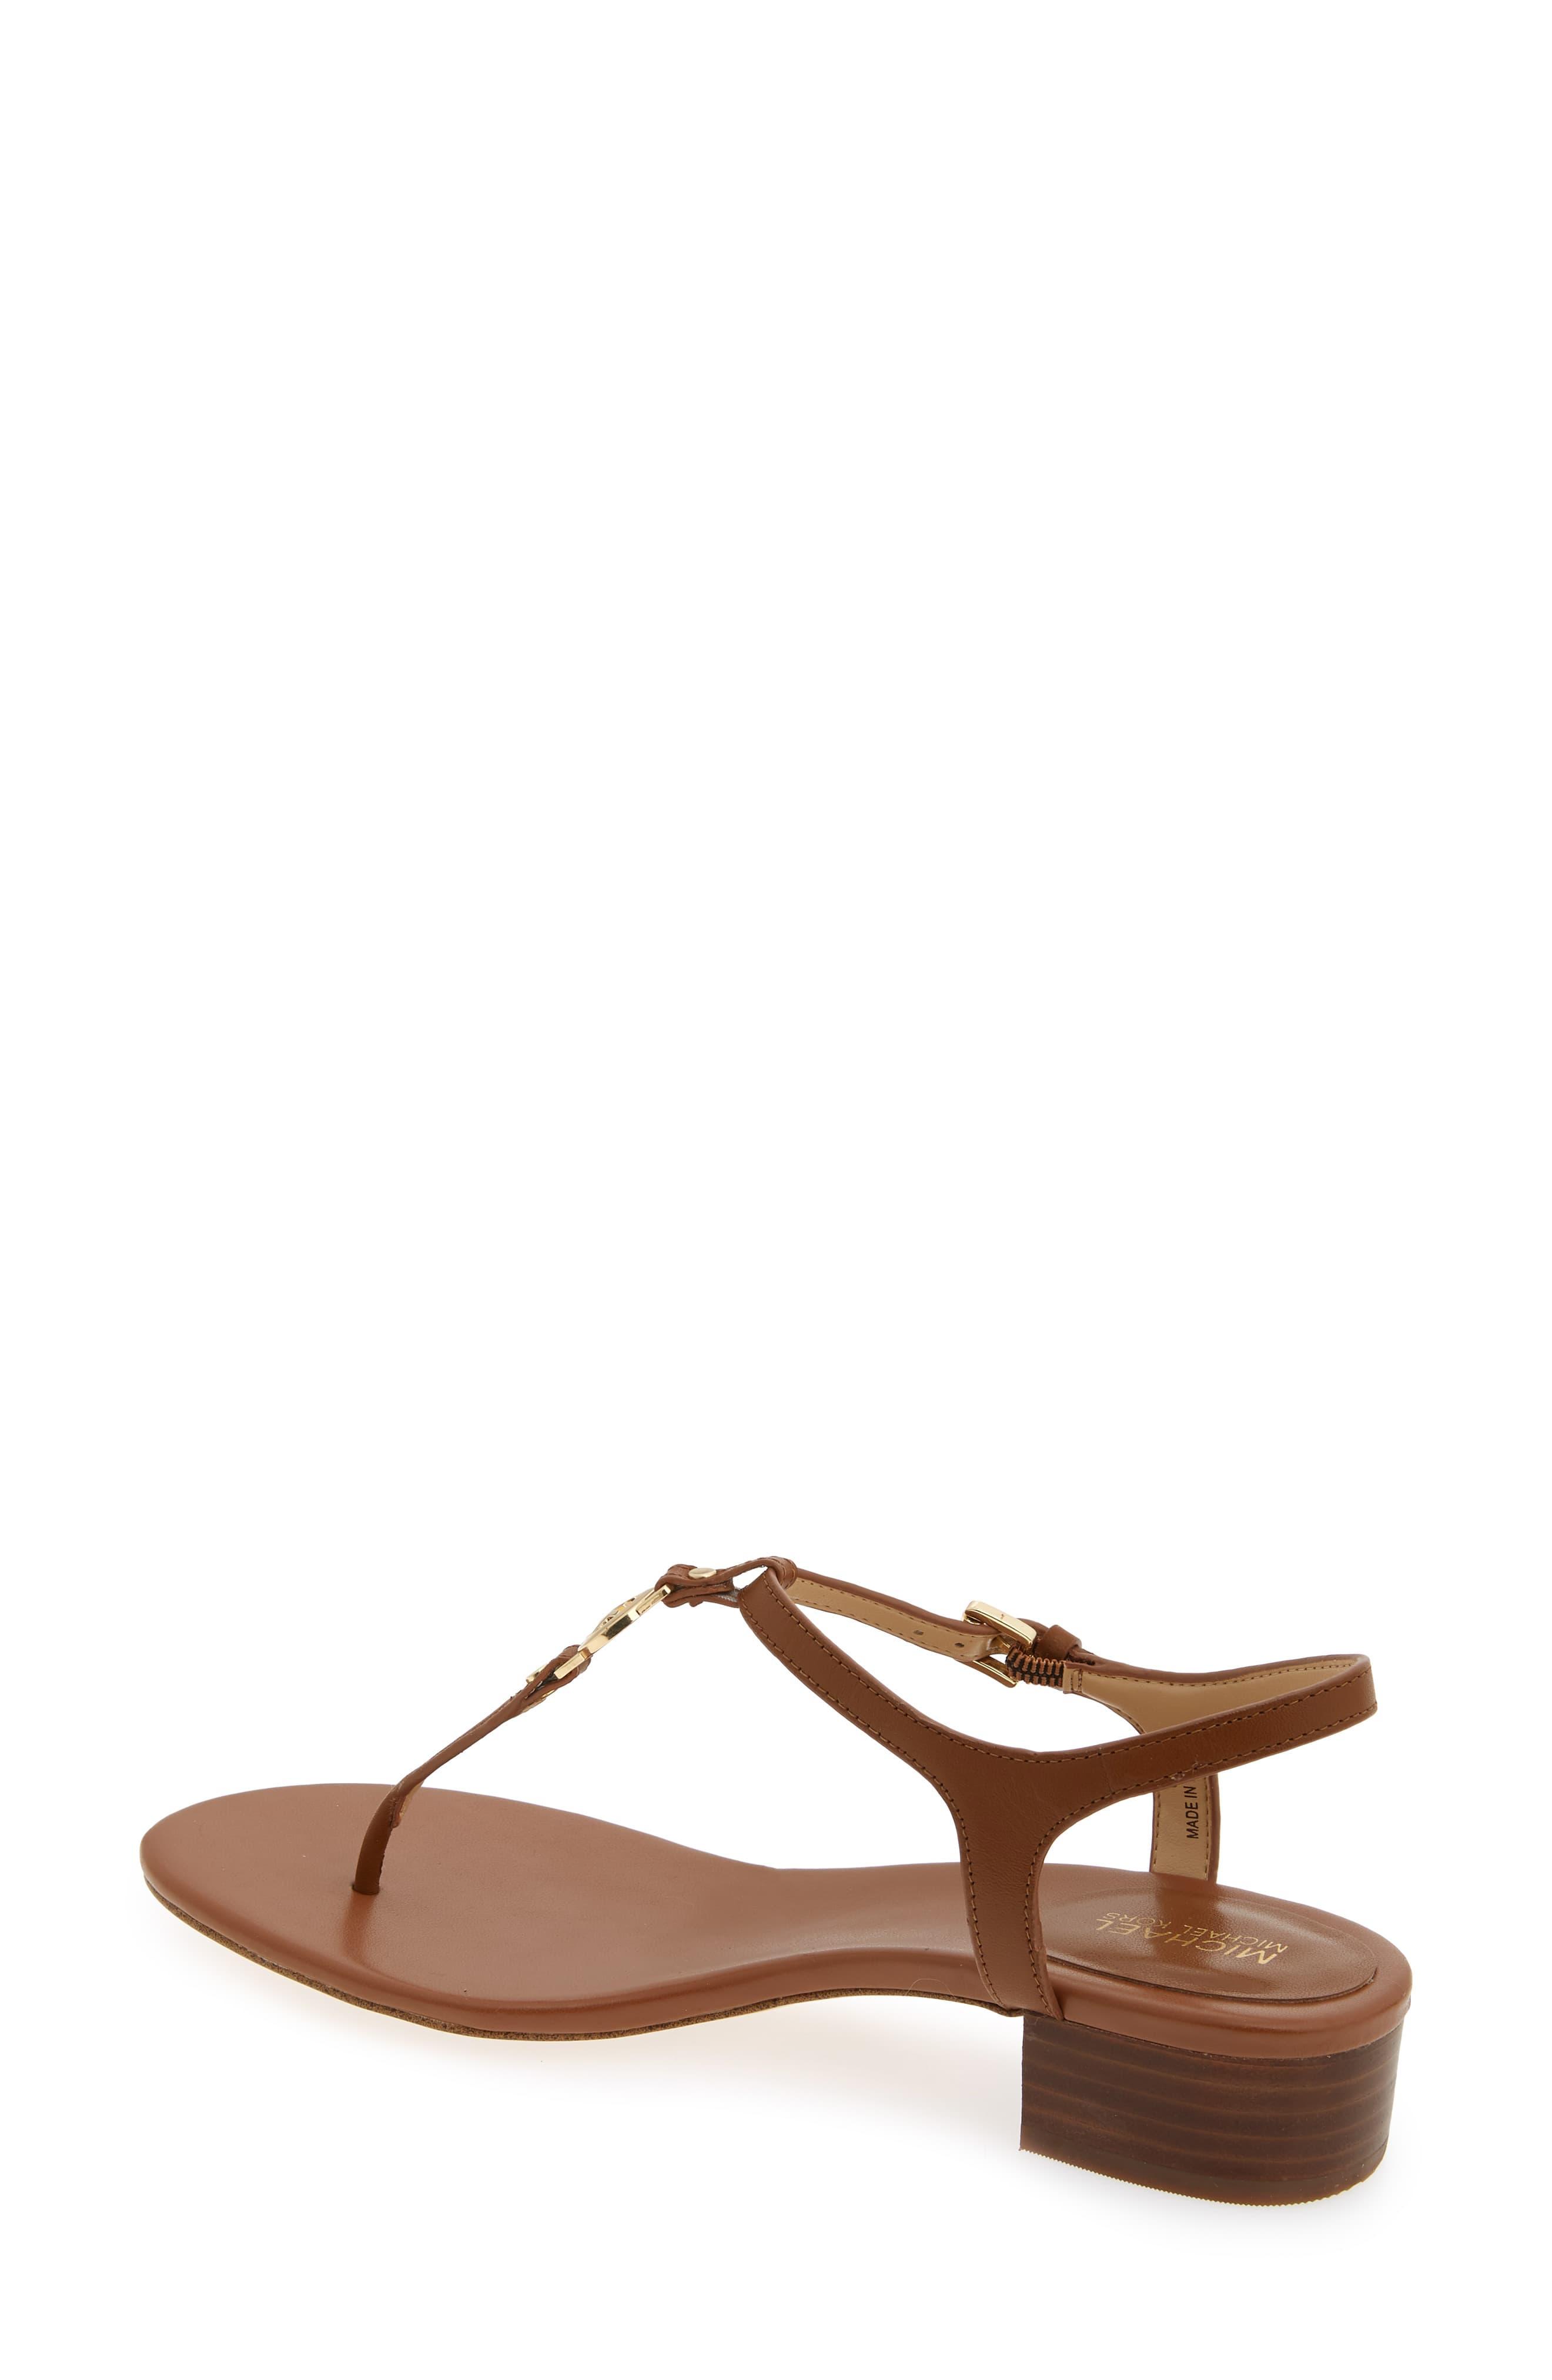 MICHAEL Michael Kors Leather Cayla T-strap Sandal in Brown - Lyst